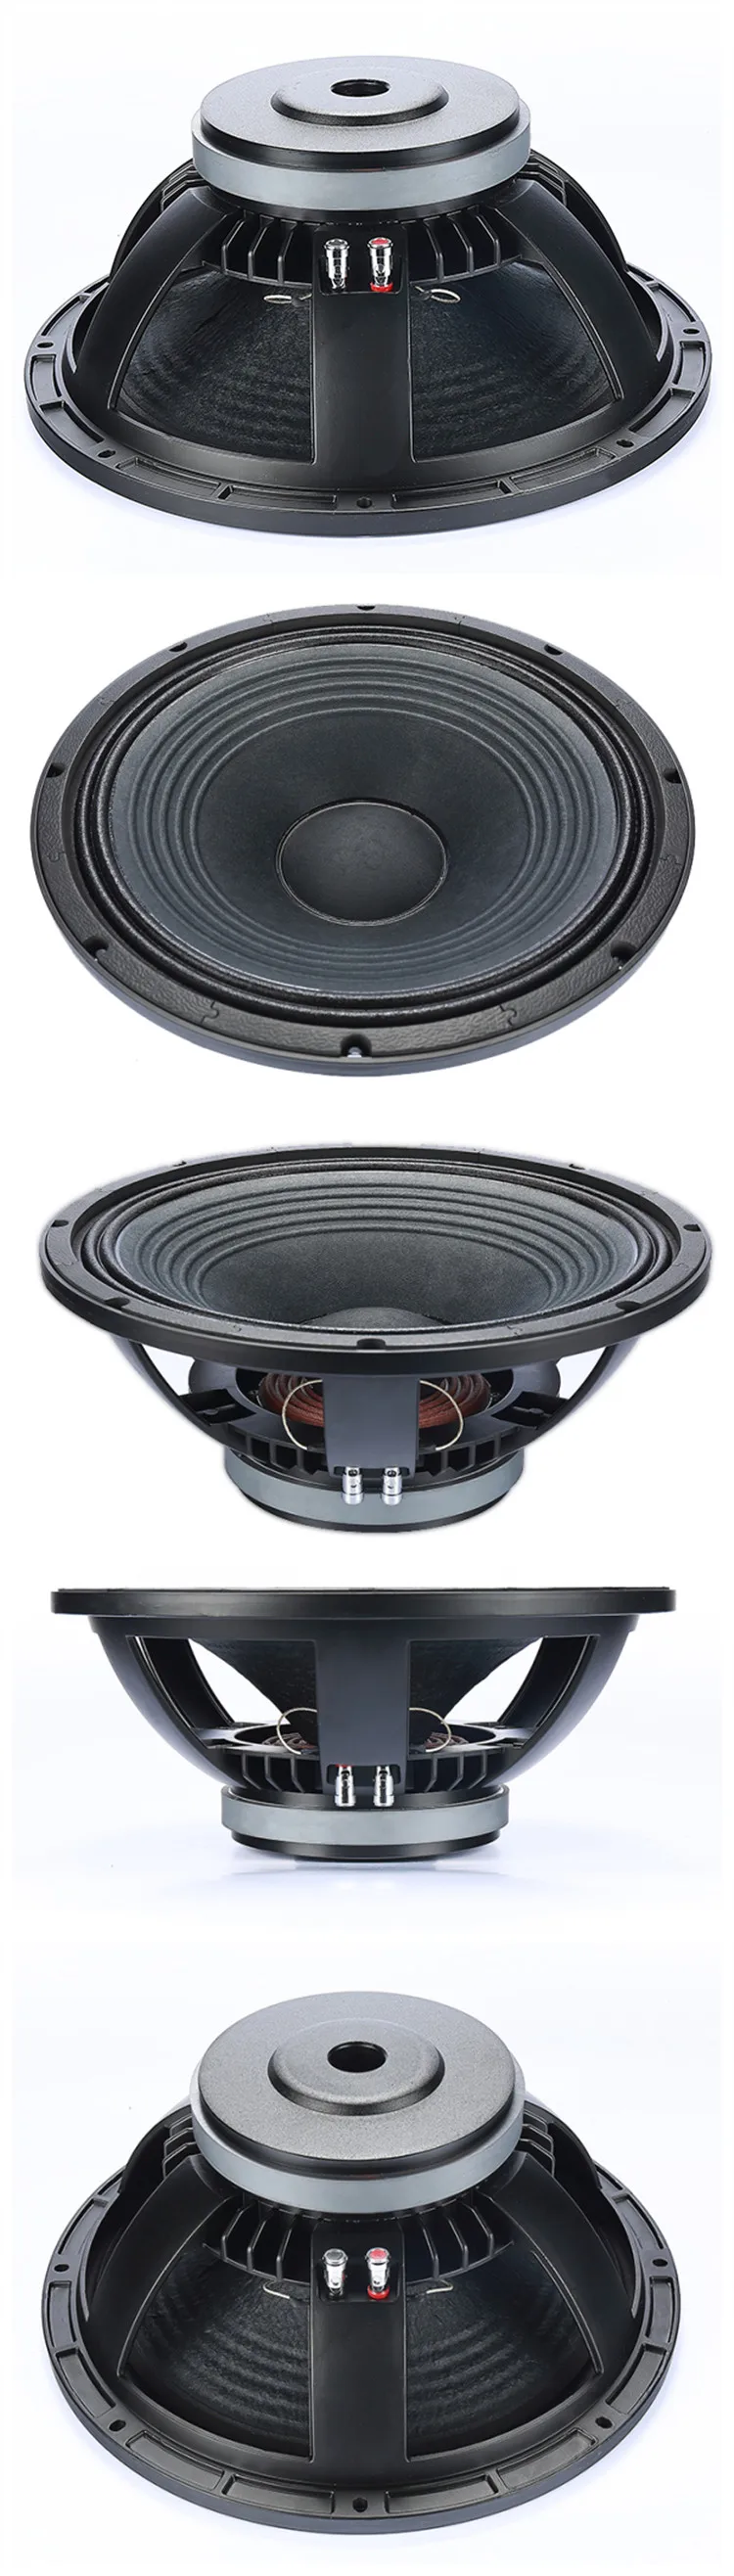 15 Inch 450w Merry Audio For Professional System Speaker Driver Buy 15 Inch 450w Merry Audio